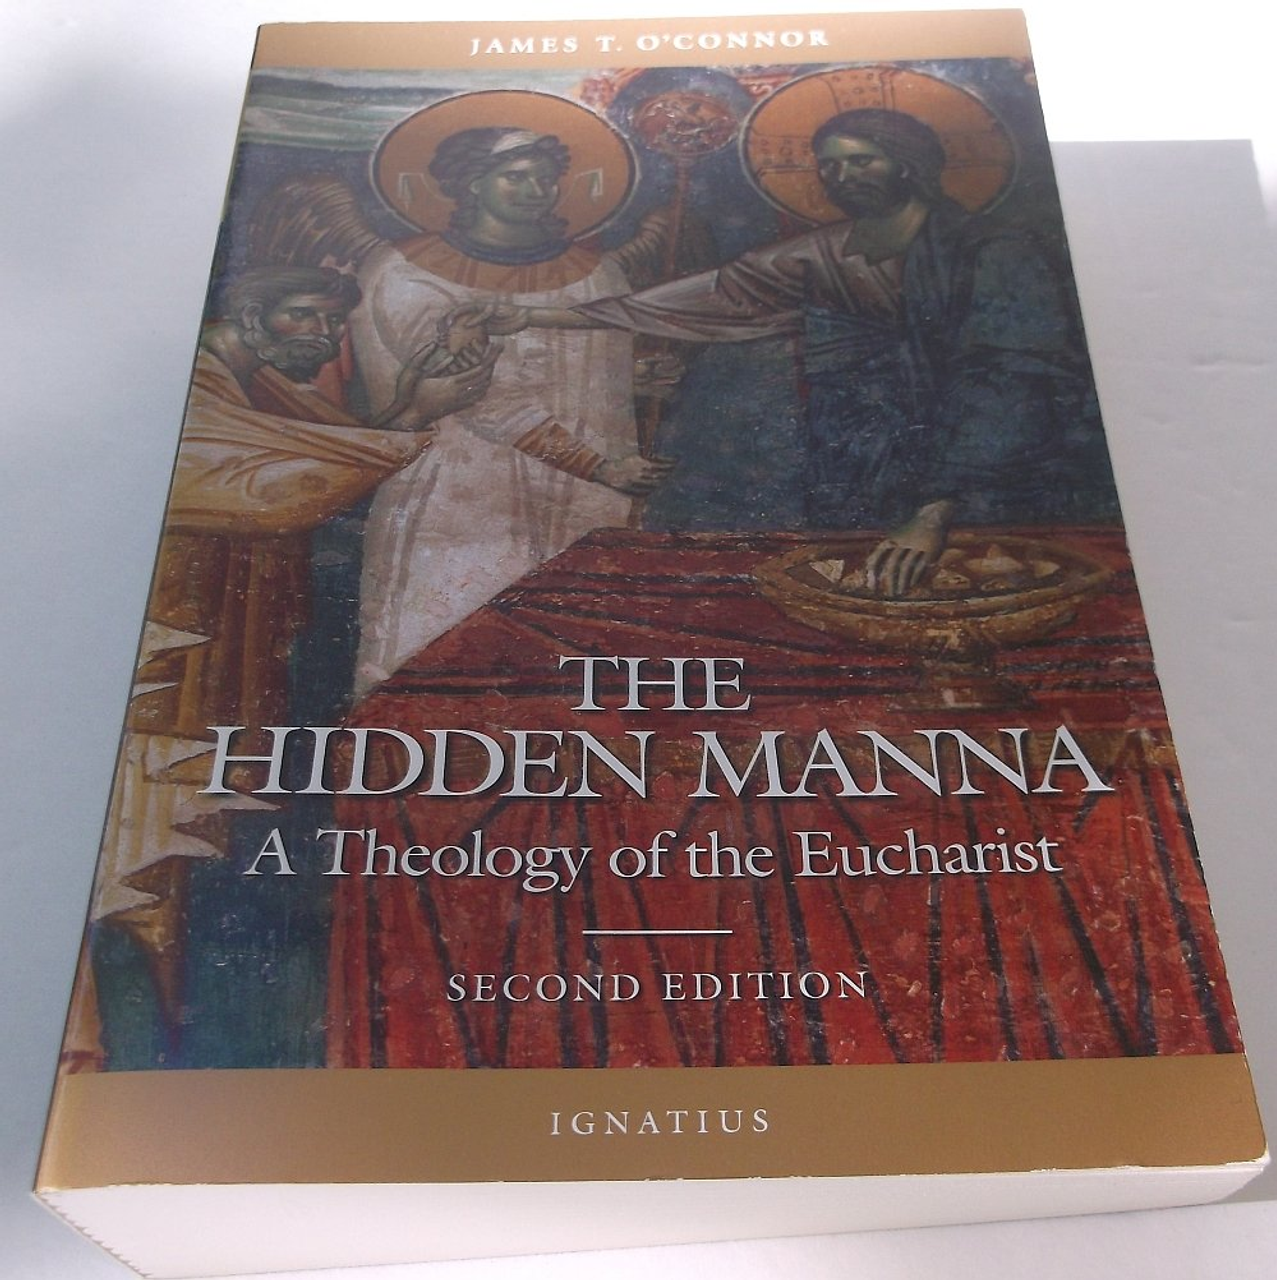 The Hidden Manna A Theology of the Eucharist by James T. O'Connor